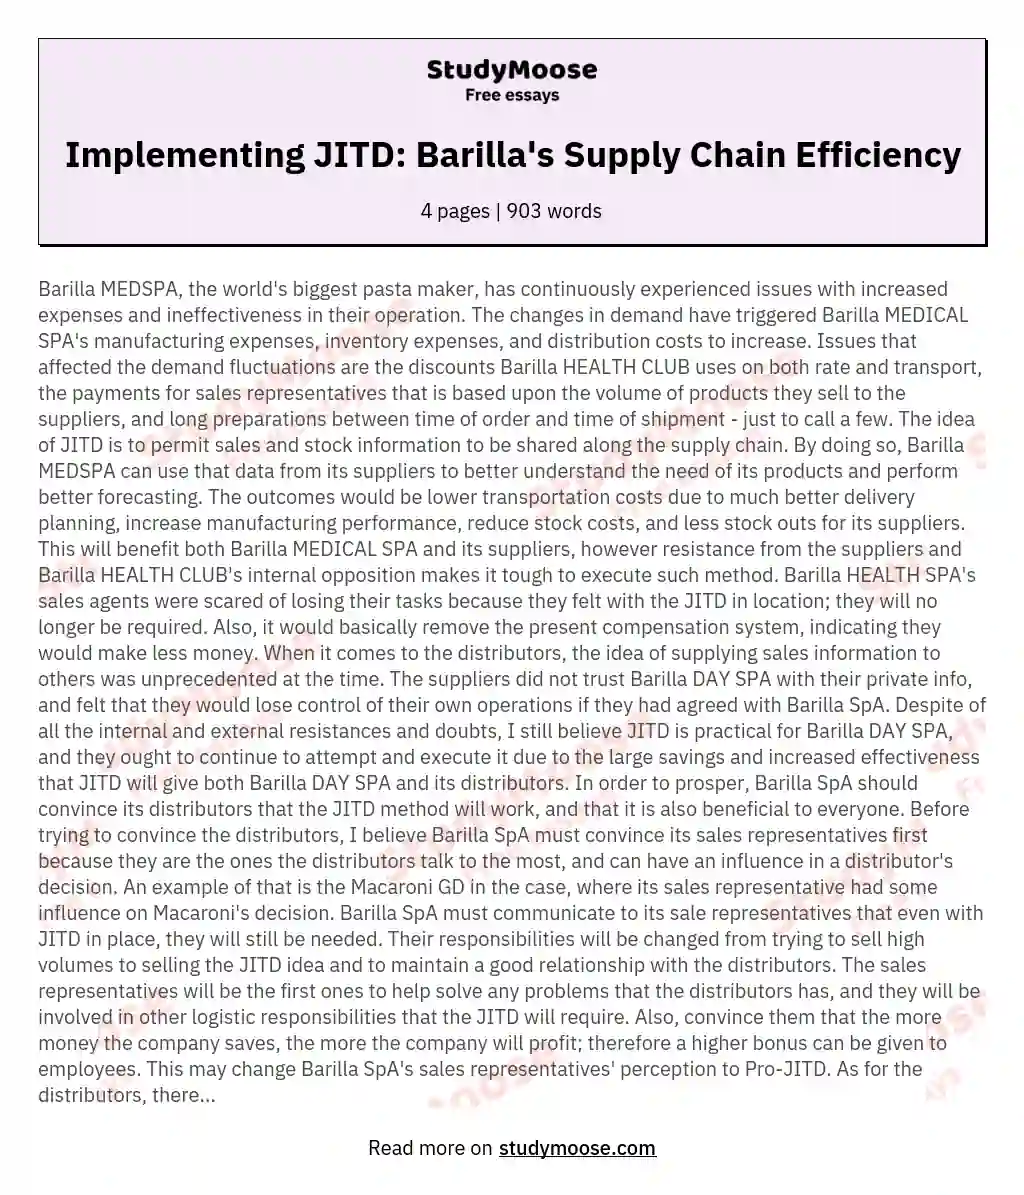 Implementing JITD: Barilla's Supply Chain Efficiency essay